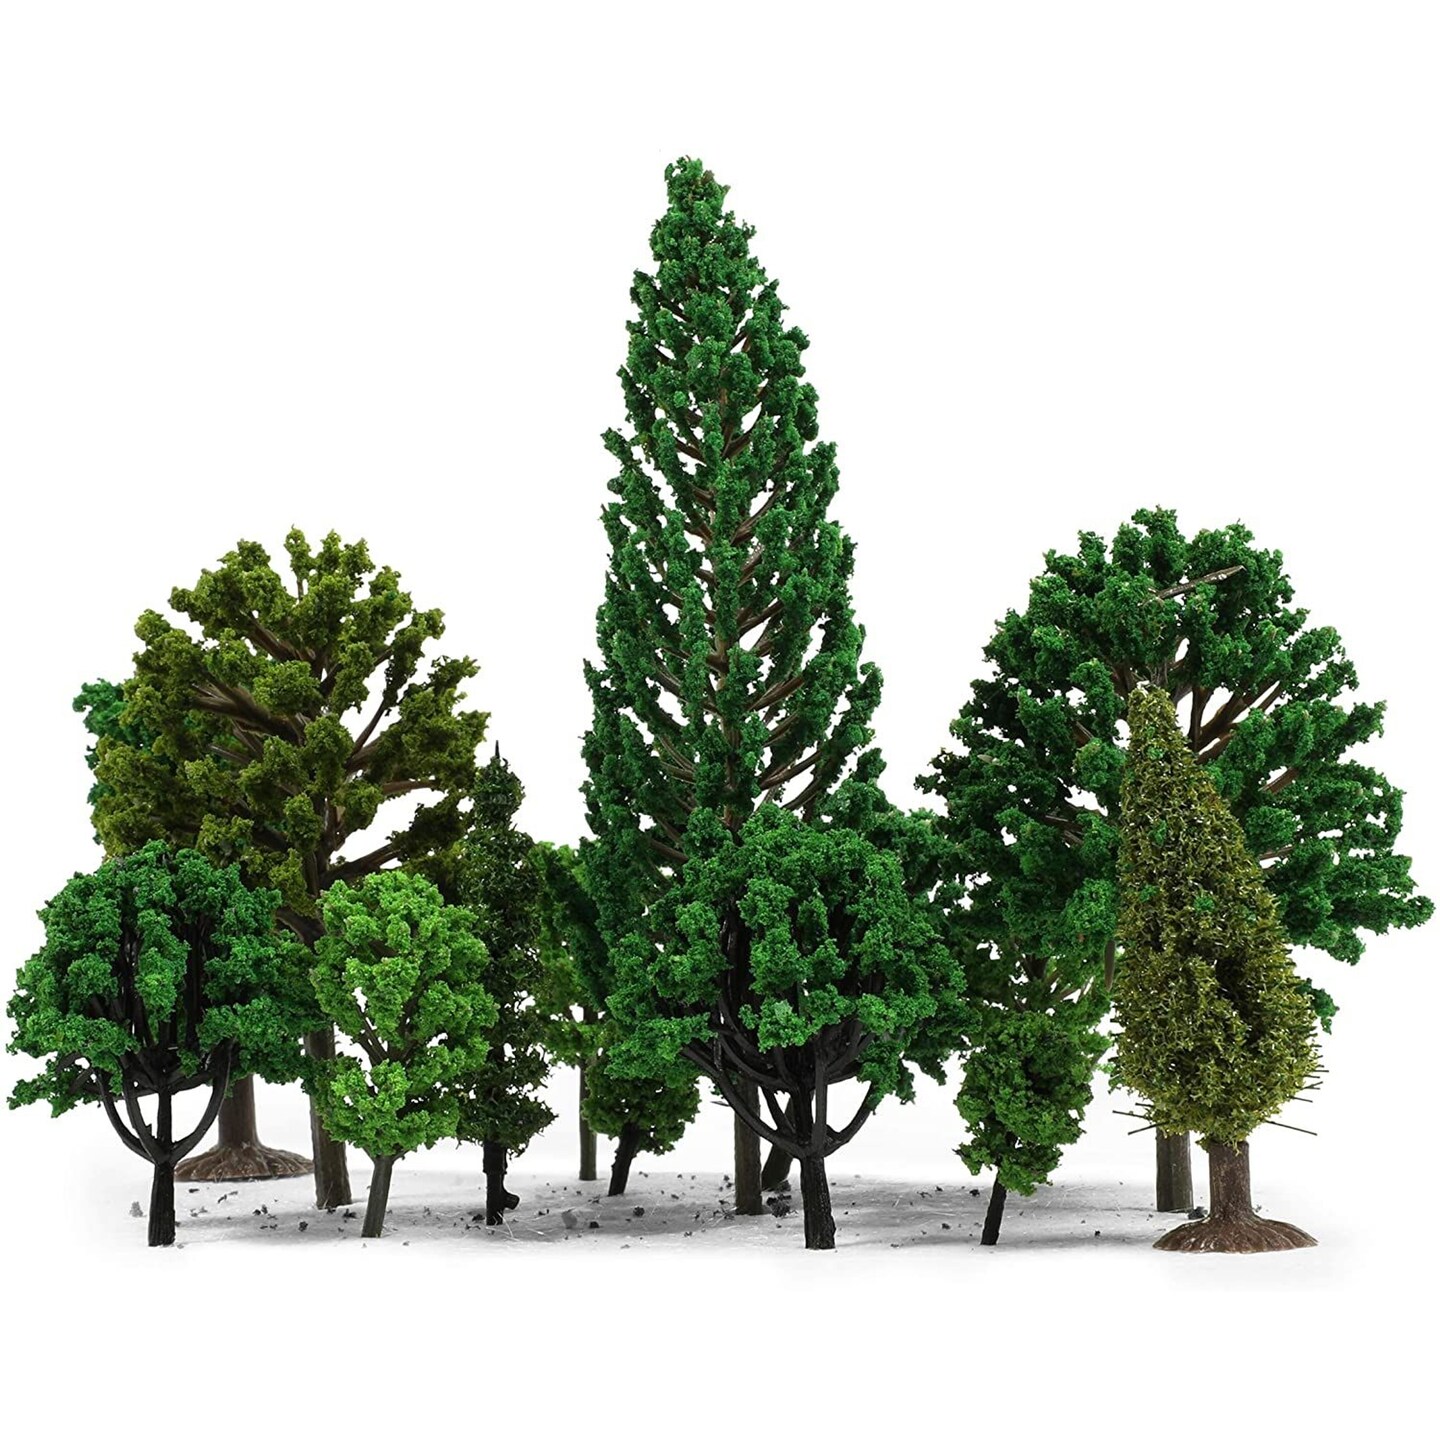 Miniature Model Trees for Dioramas, DIY Crafts (11 Sizes, 55 Pieces)